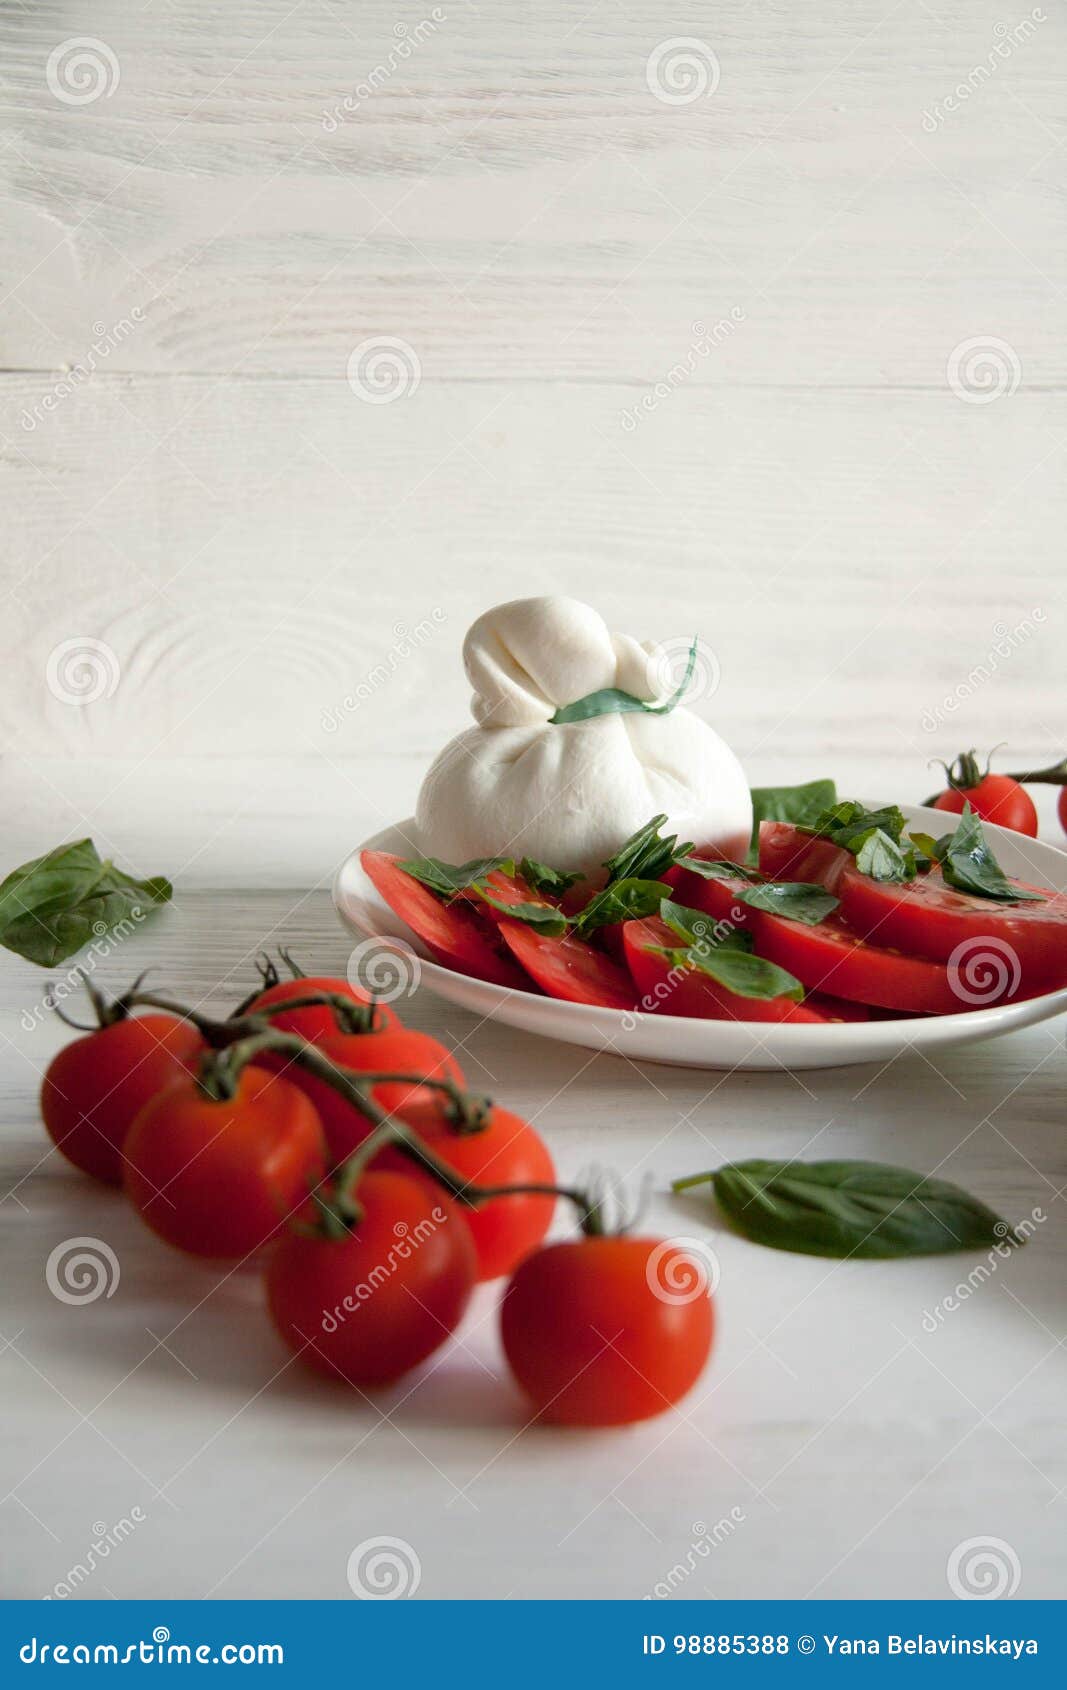 salad with fresh tomato, cheese and basil